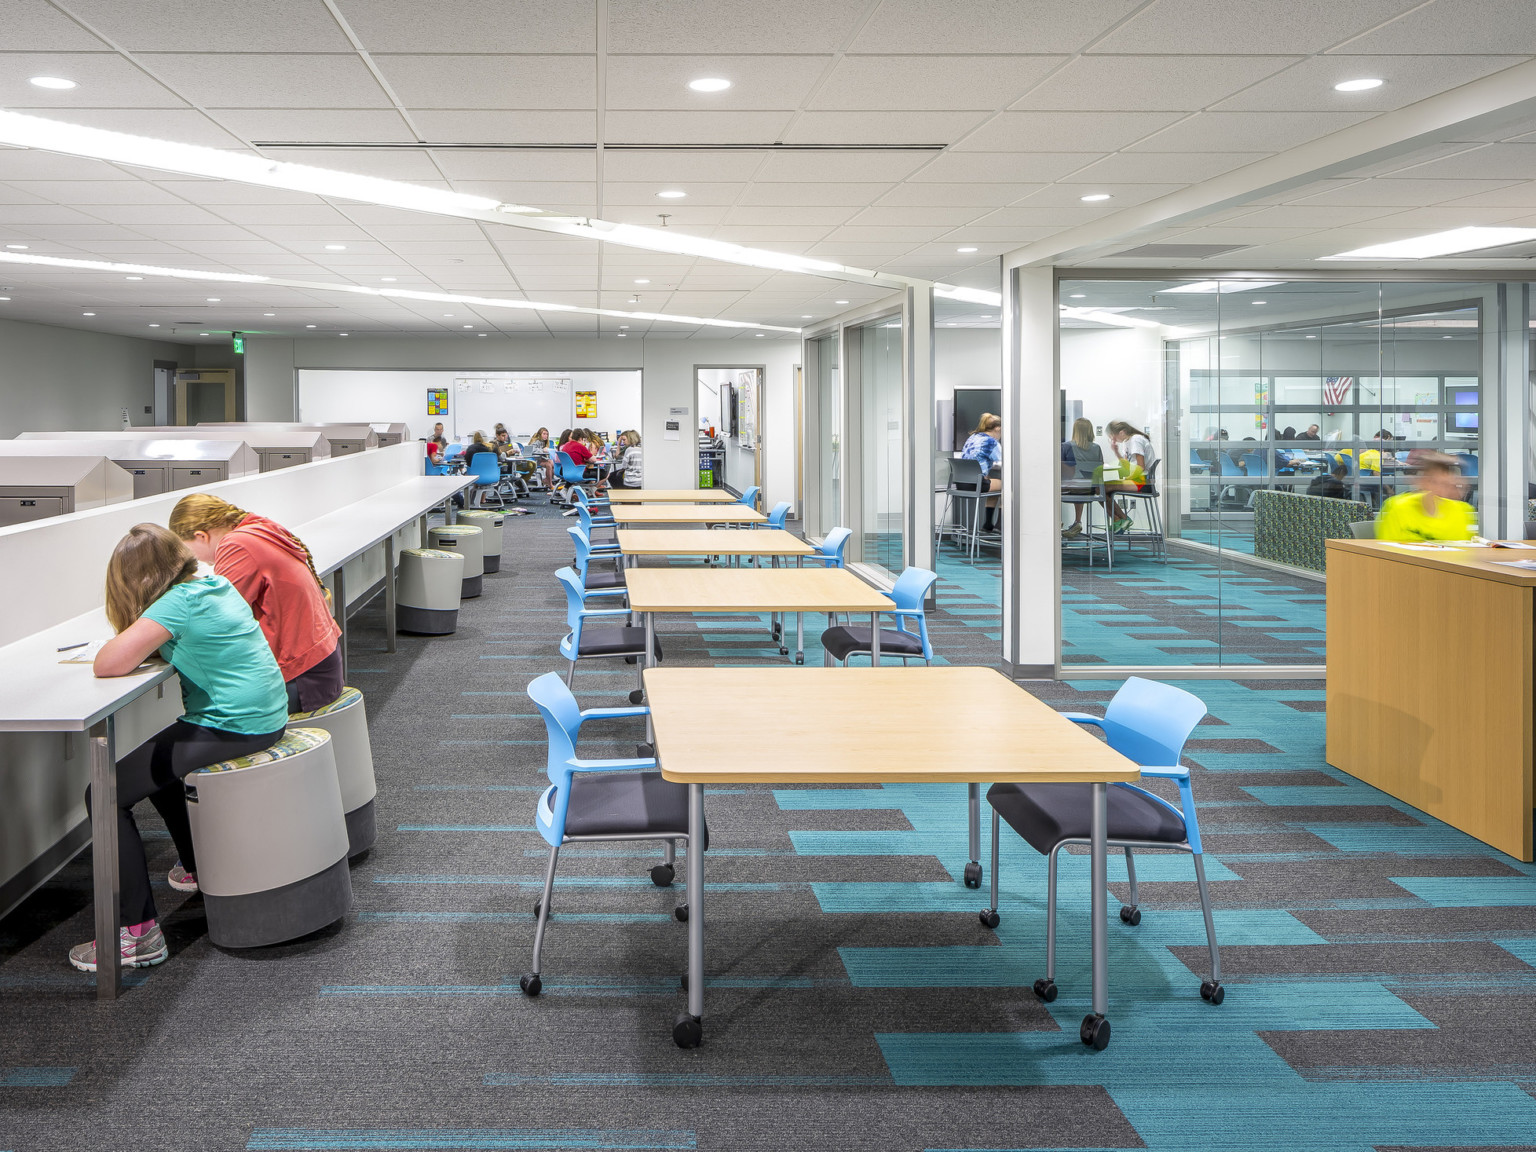 Long white room with white counter and stools, left. Tables with blue chairs, right. Glass walled learning spaces far right